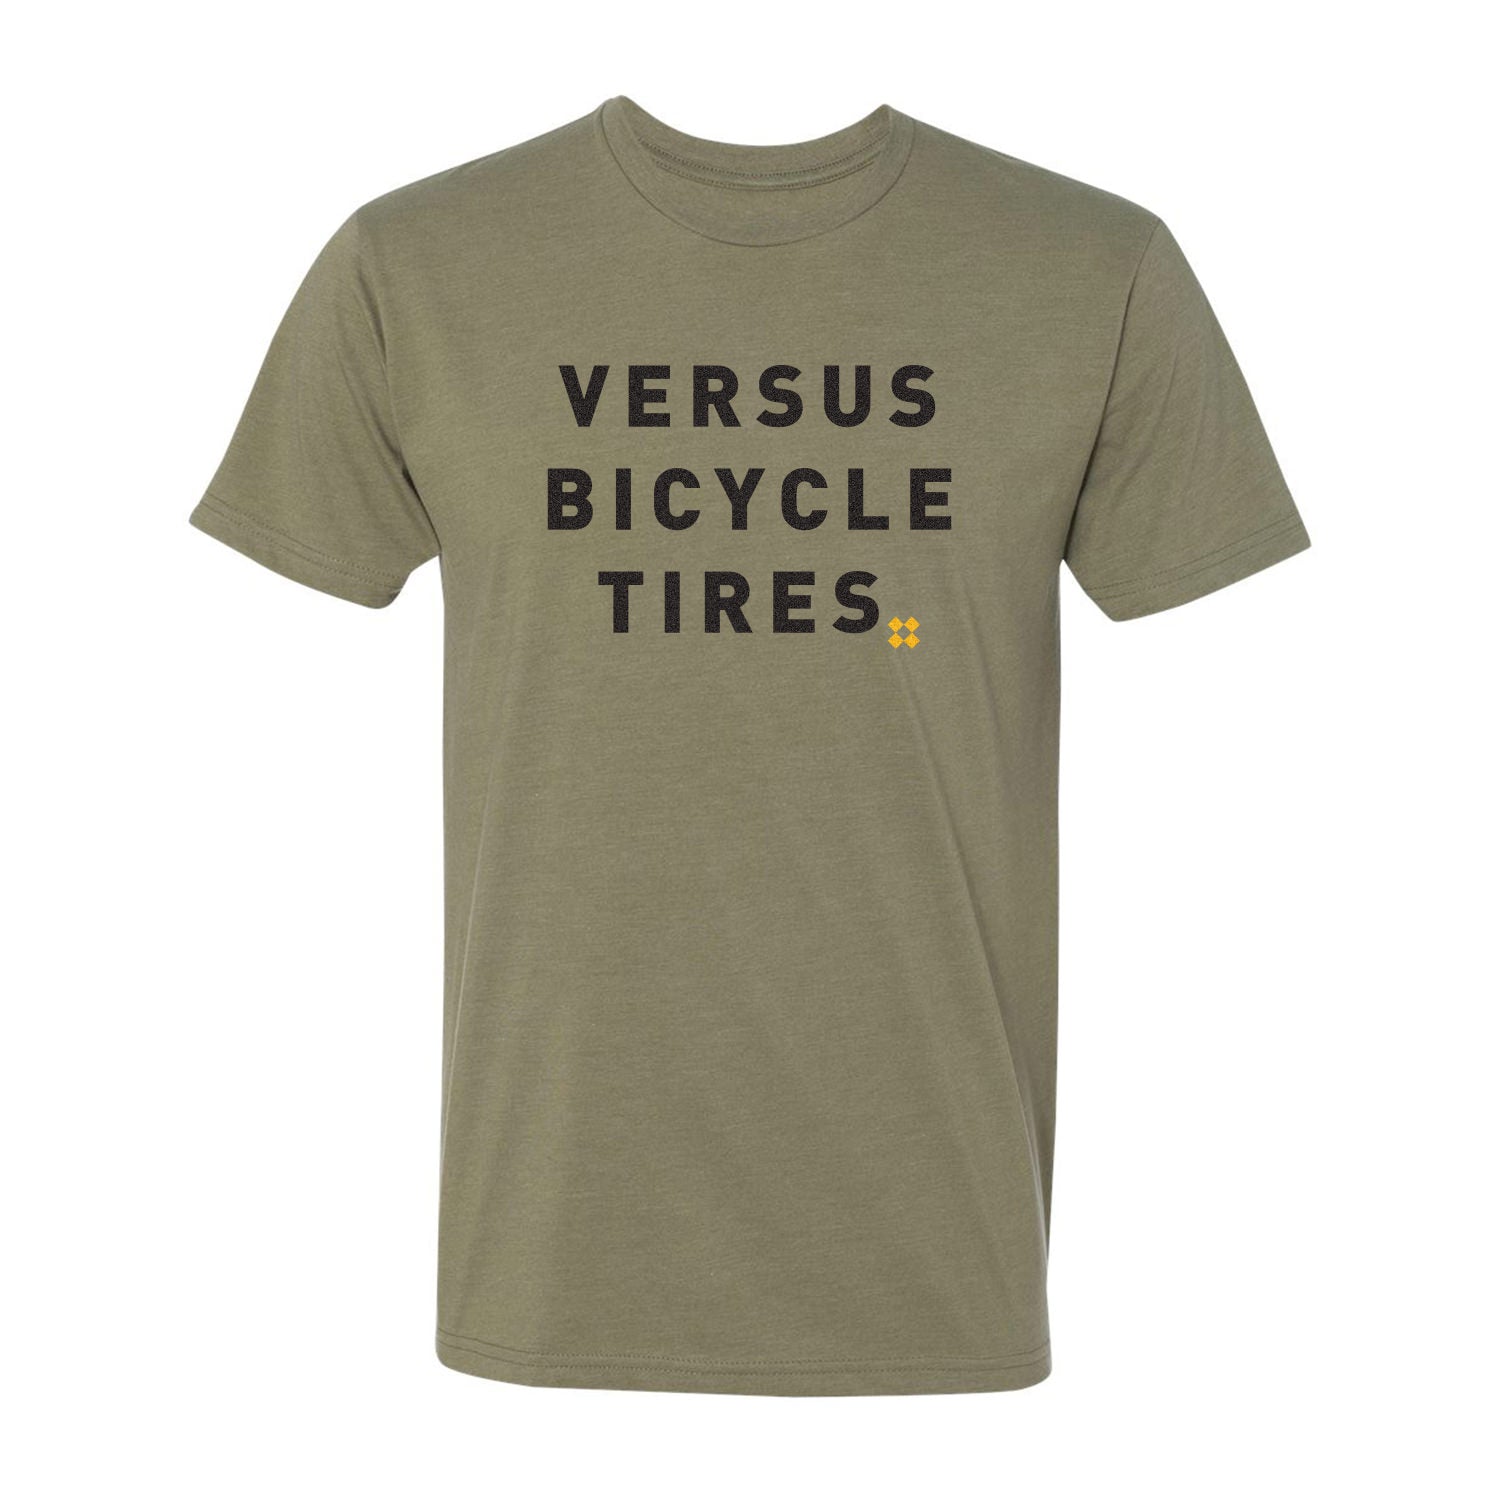 Versus Tires Text t-shirt in olive colorway